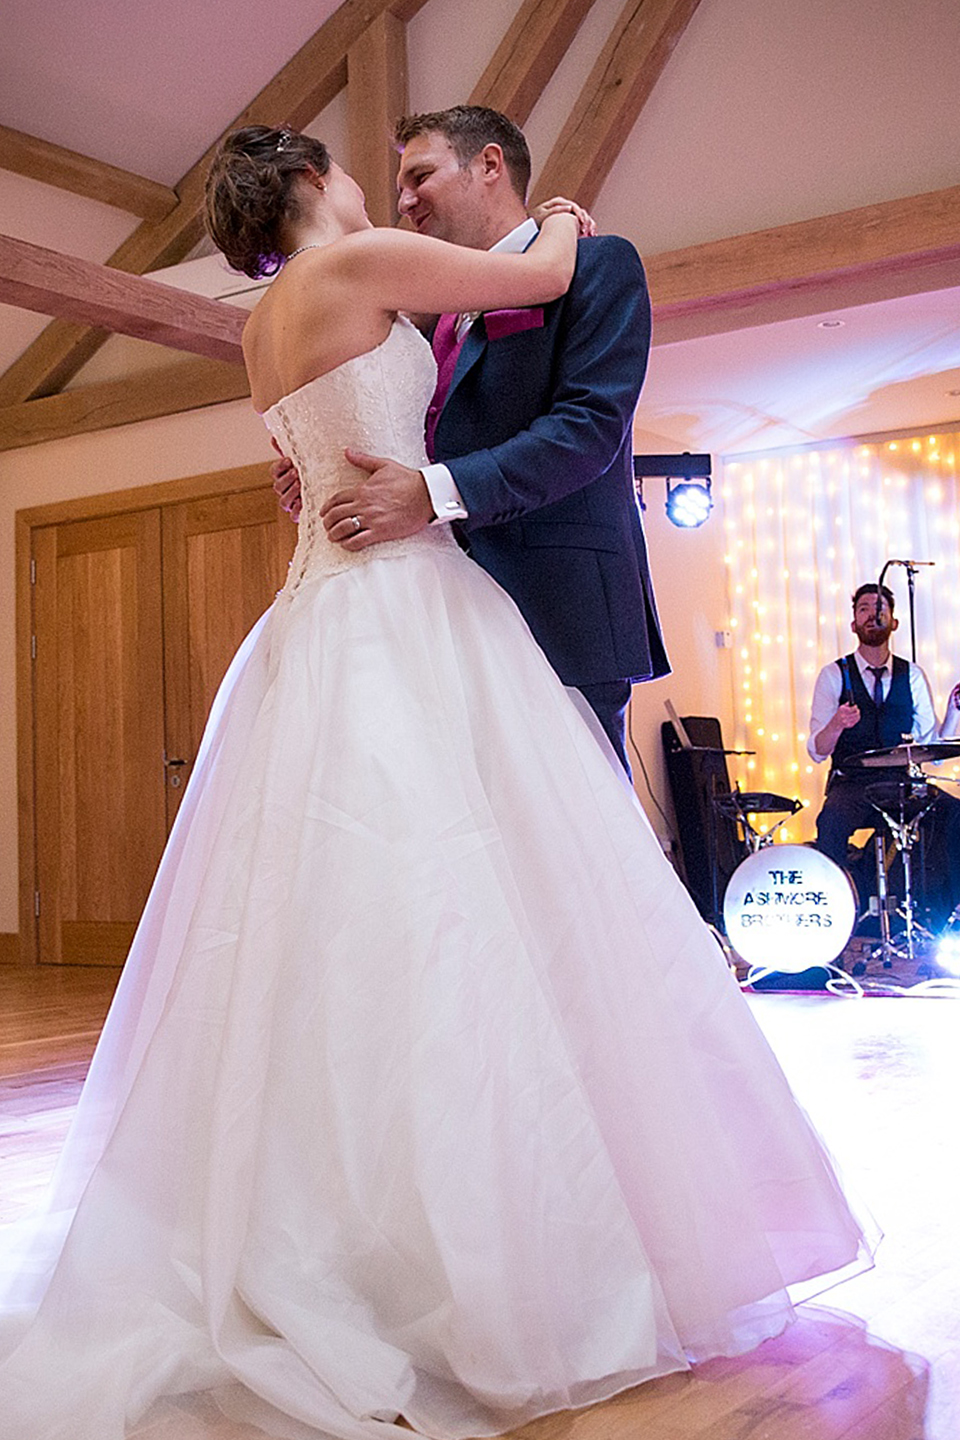 The newlyweds have their first dance as husband and wife inside the stunning barn wedding venue